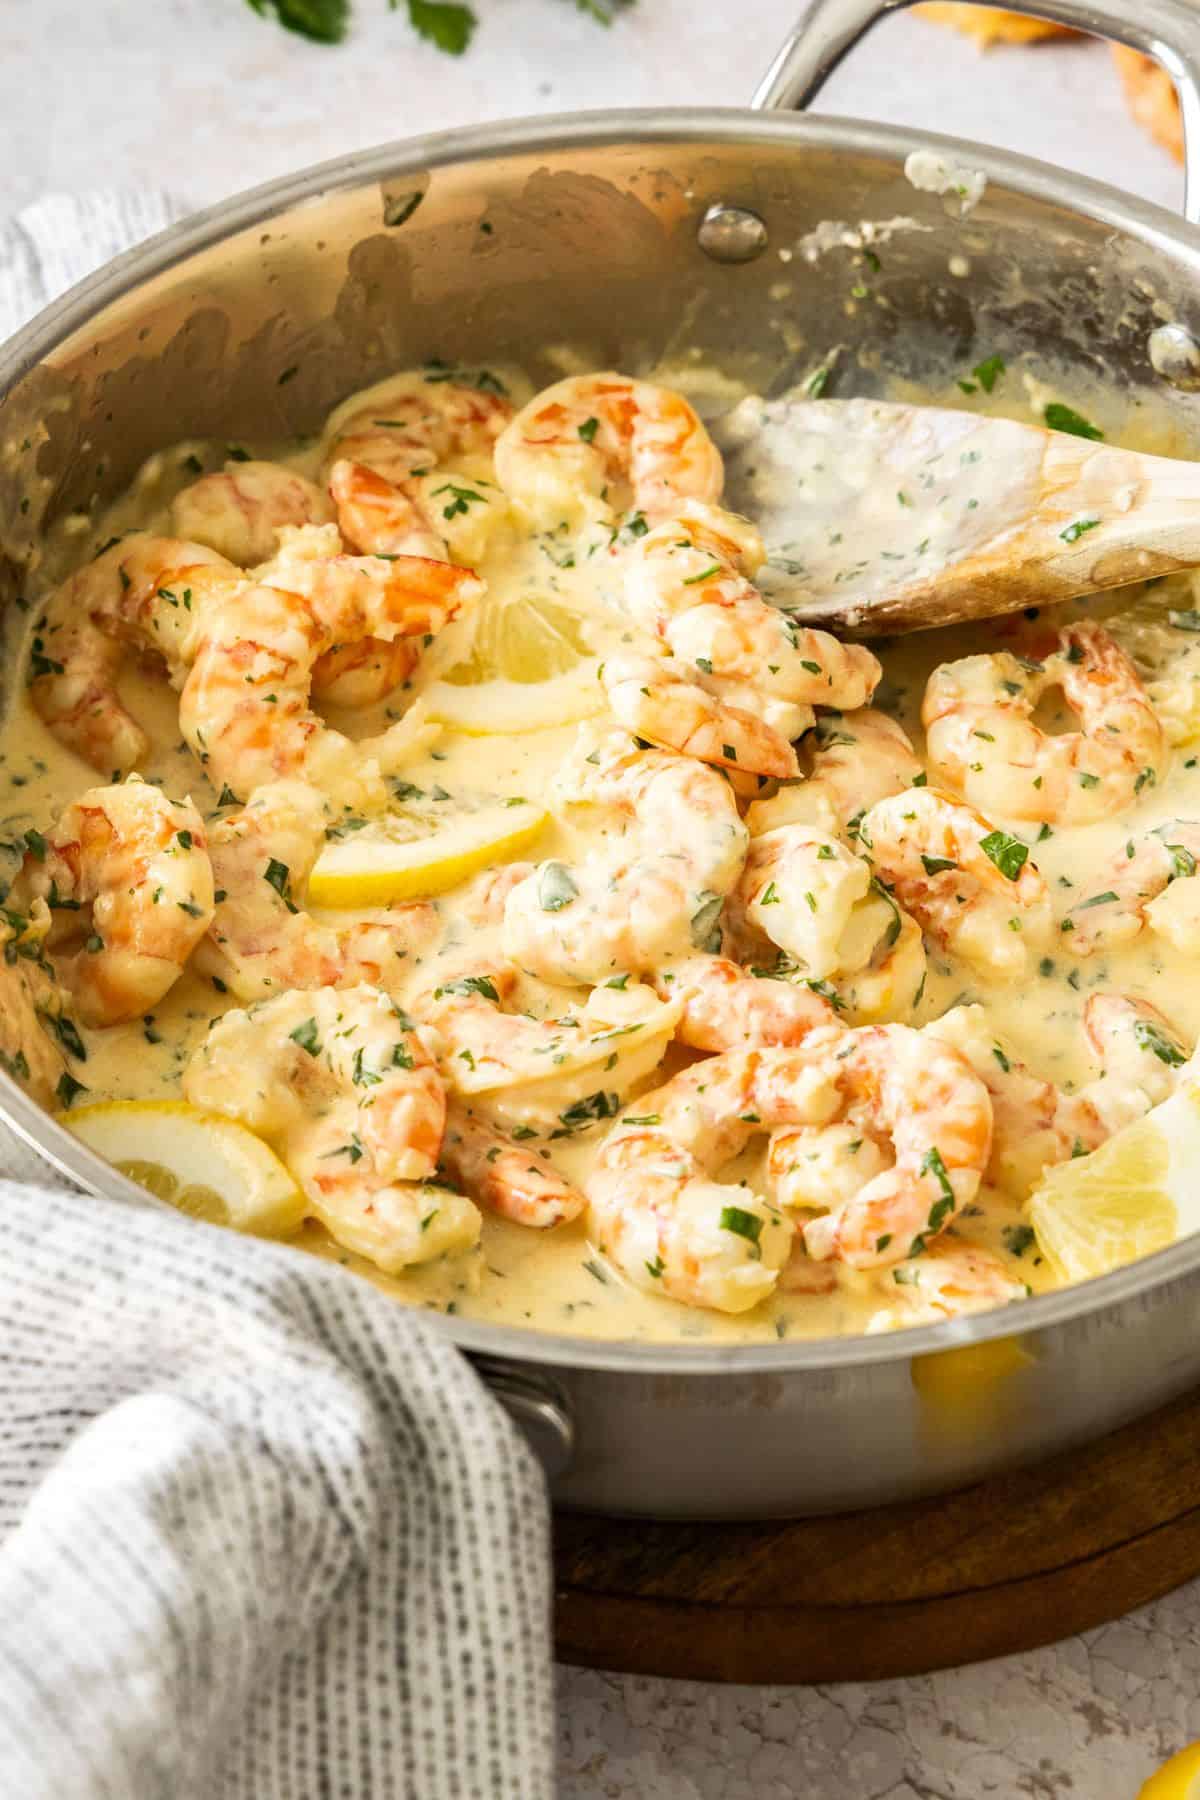 Frying pan with Creamy Lemon Prawns, and a wooden spoon resting in the pan.